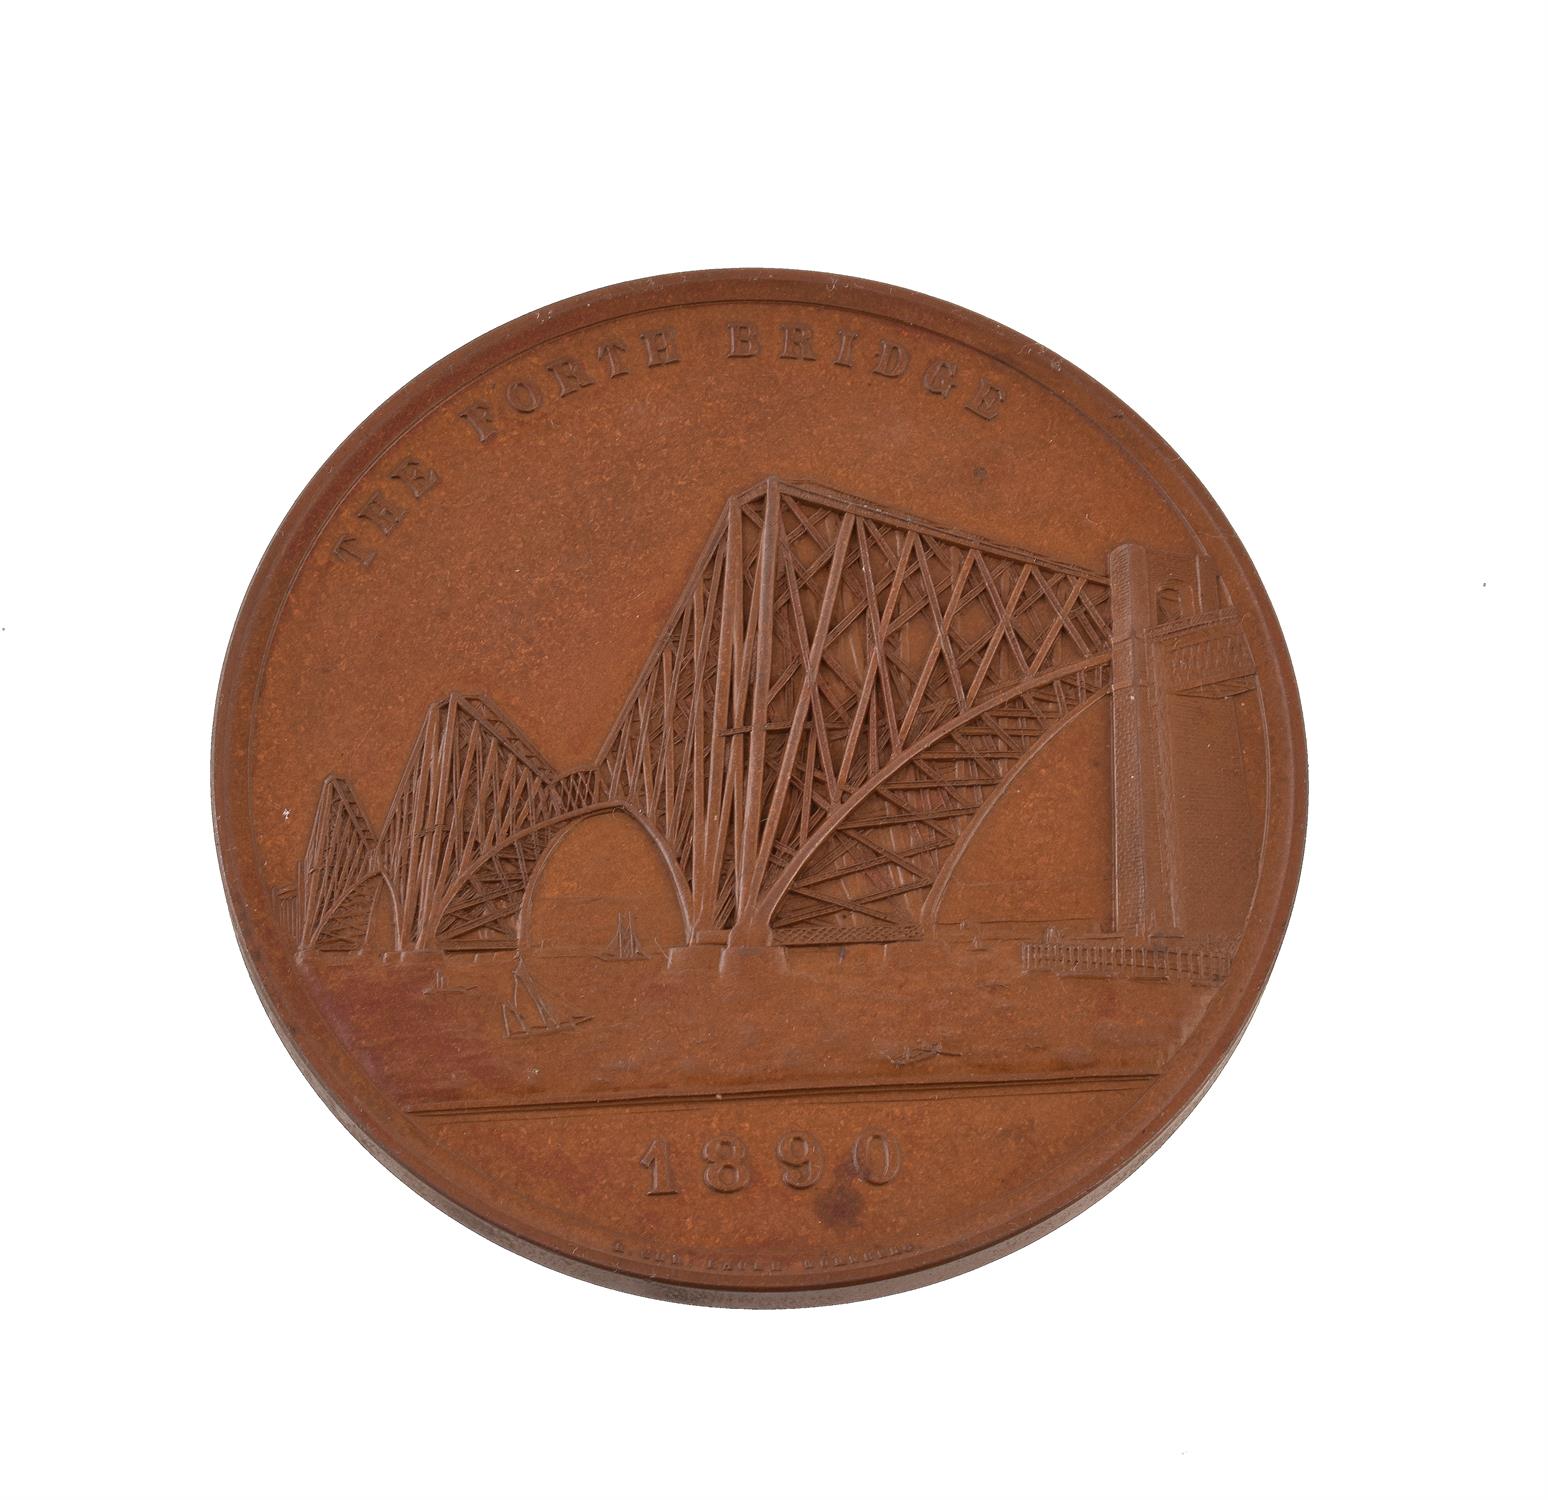 Scotland, Forth Bridge opened 1890, bronze medal by Lauer